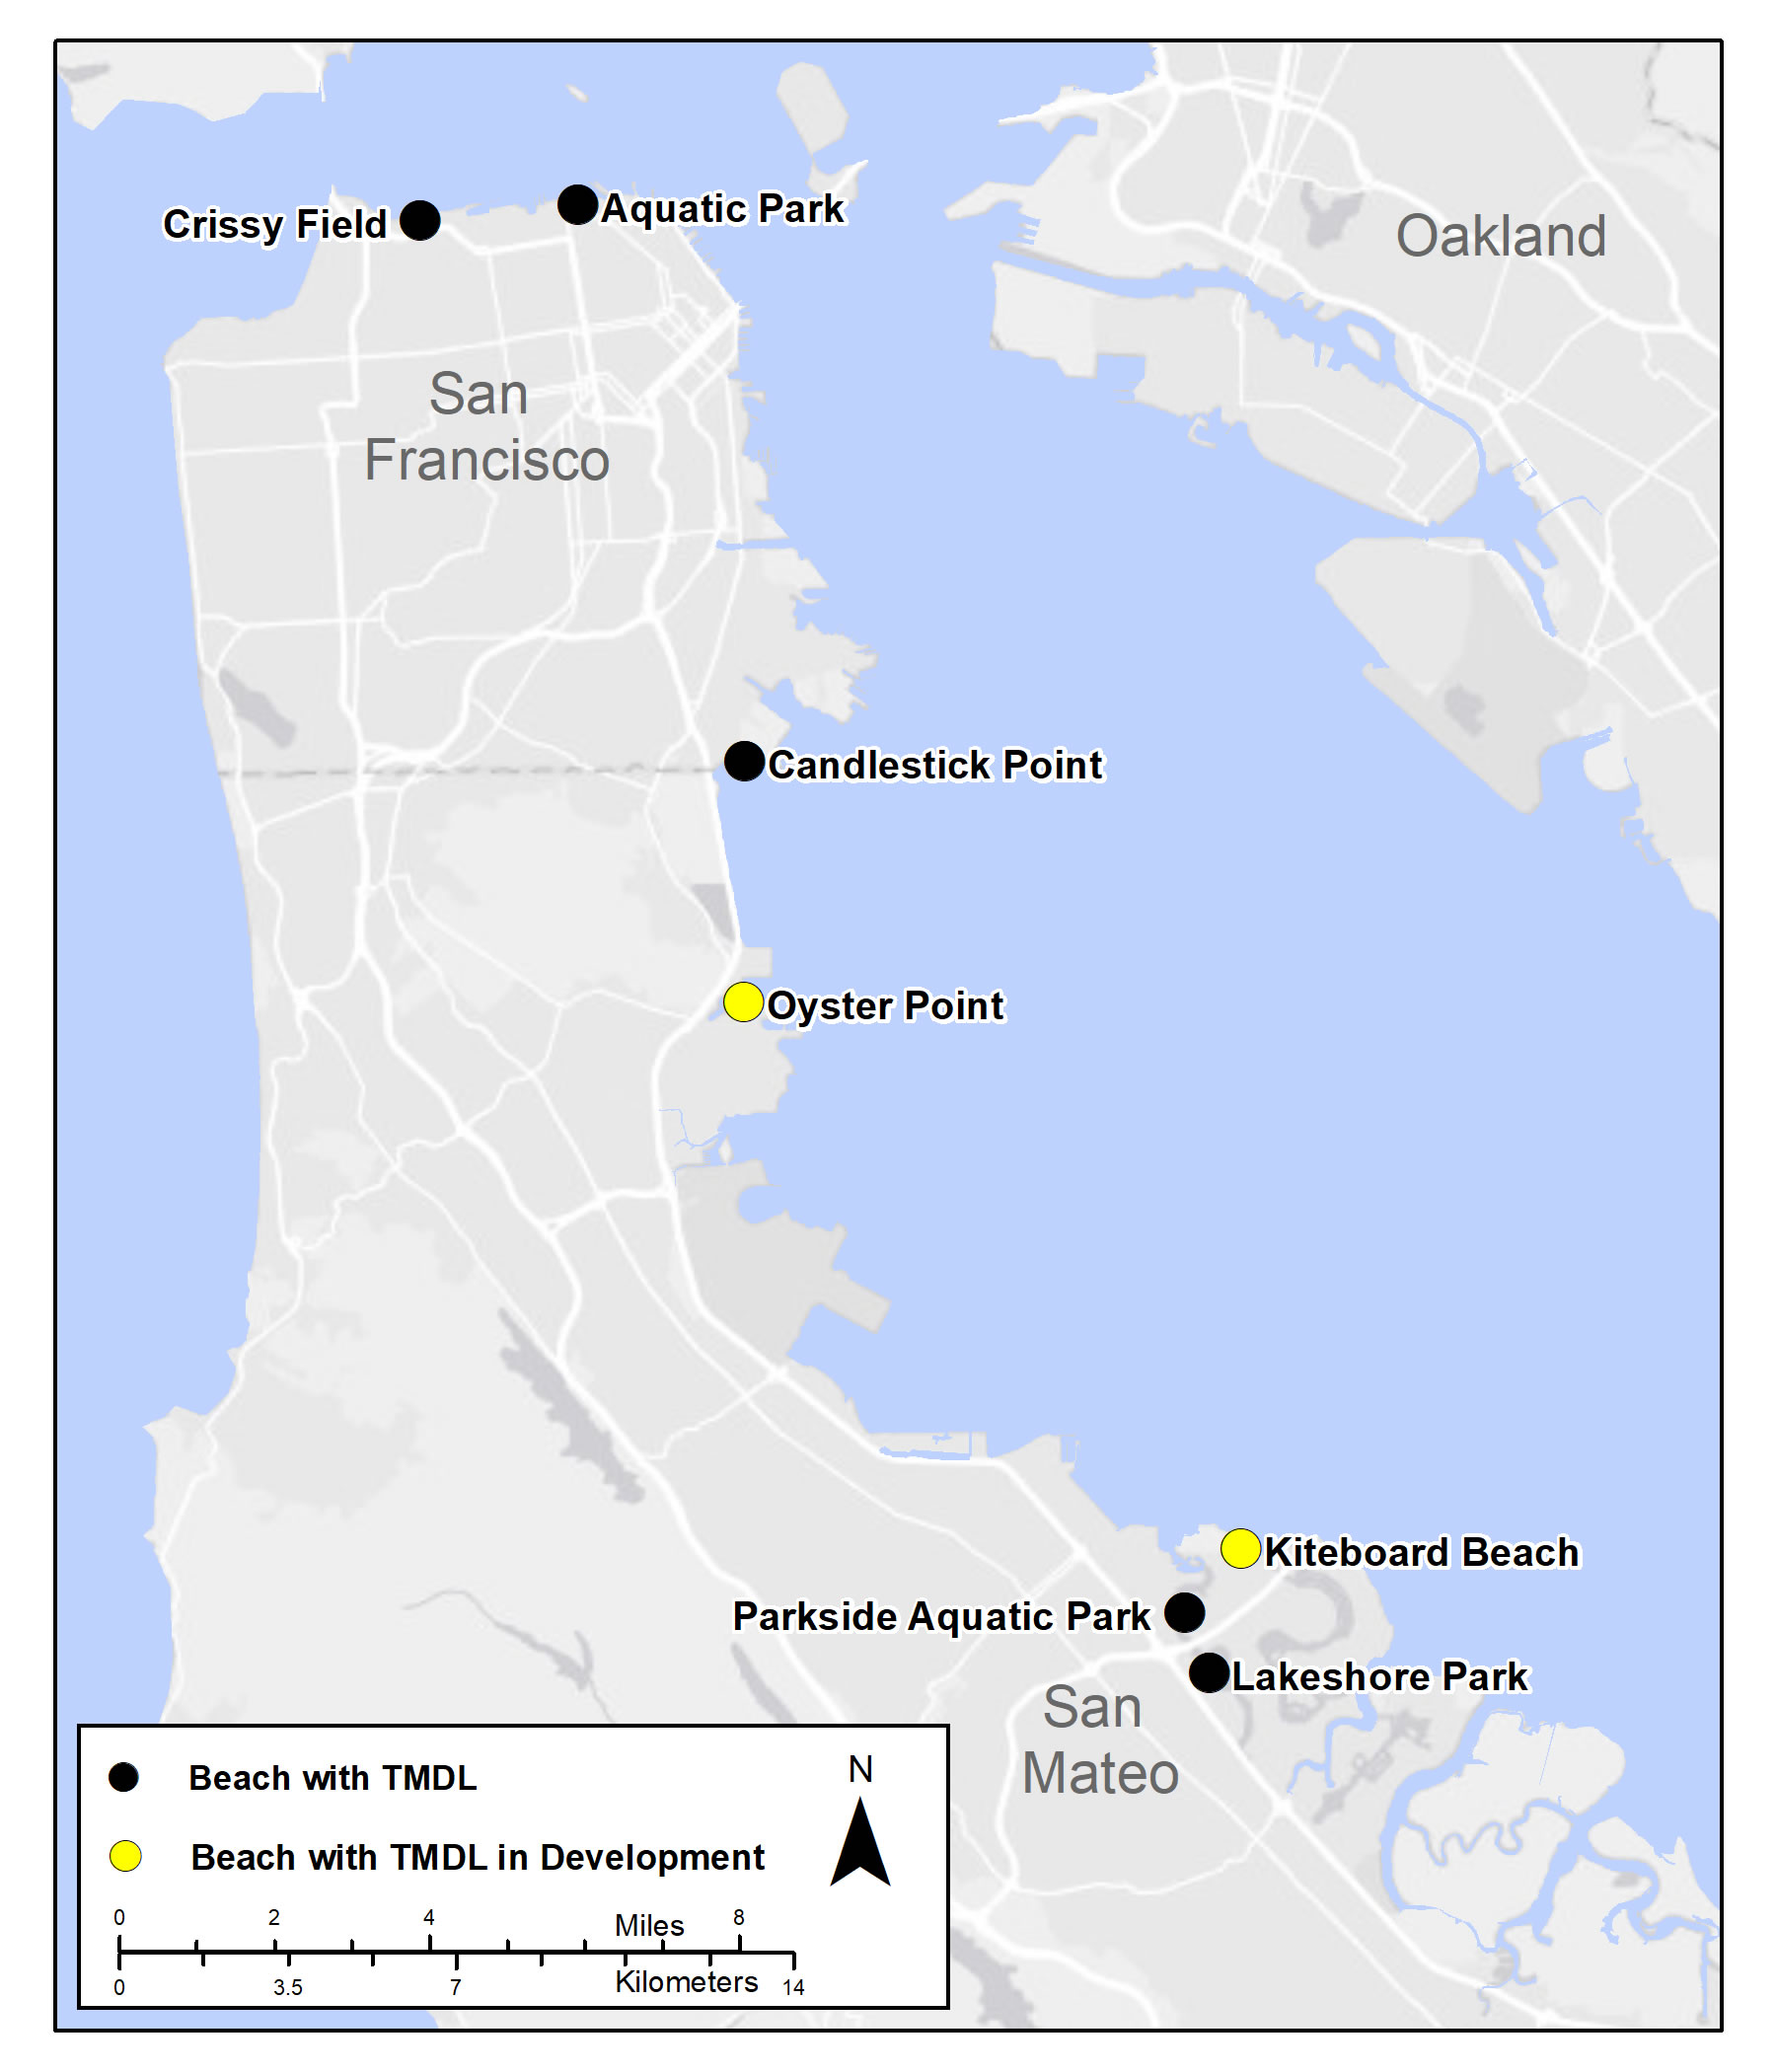 map of San Francisco Bay showing beaches covered by the SF Bay beaches TMDL